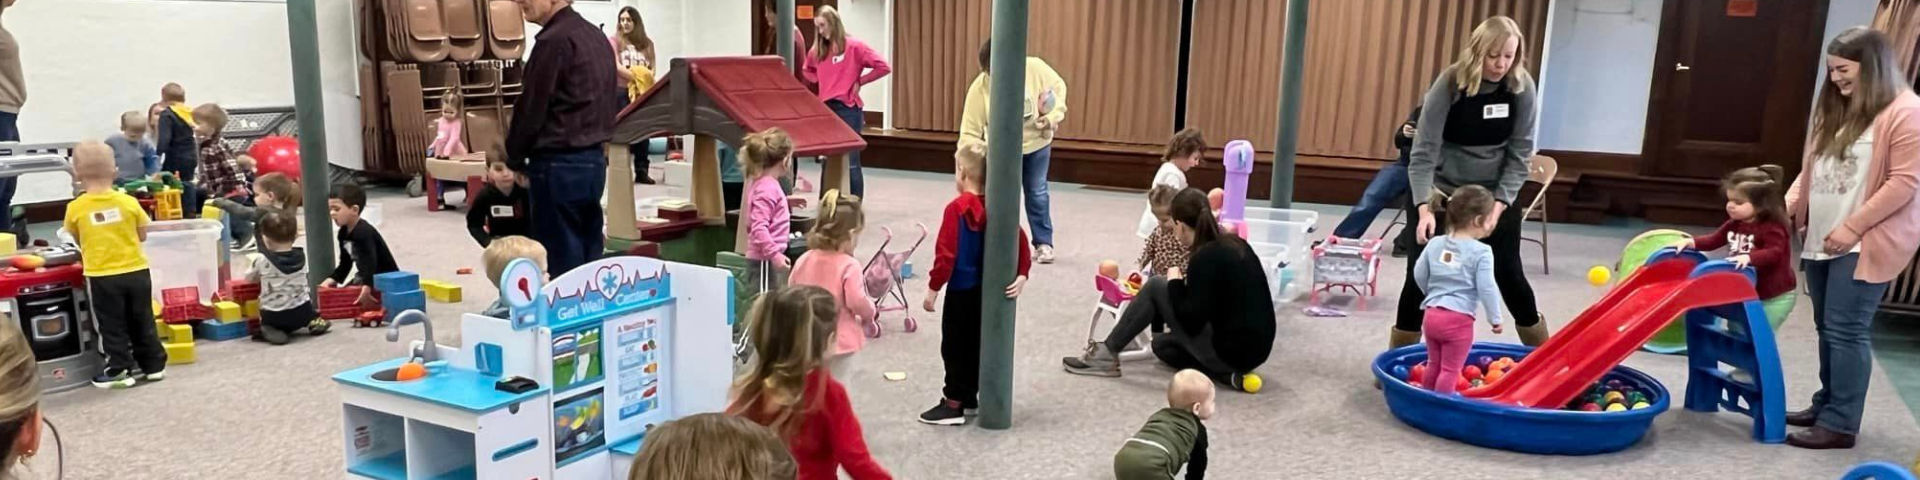 Children playing at Grace United Methodist Church's GUMDROPS playgroup